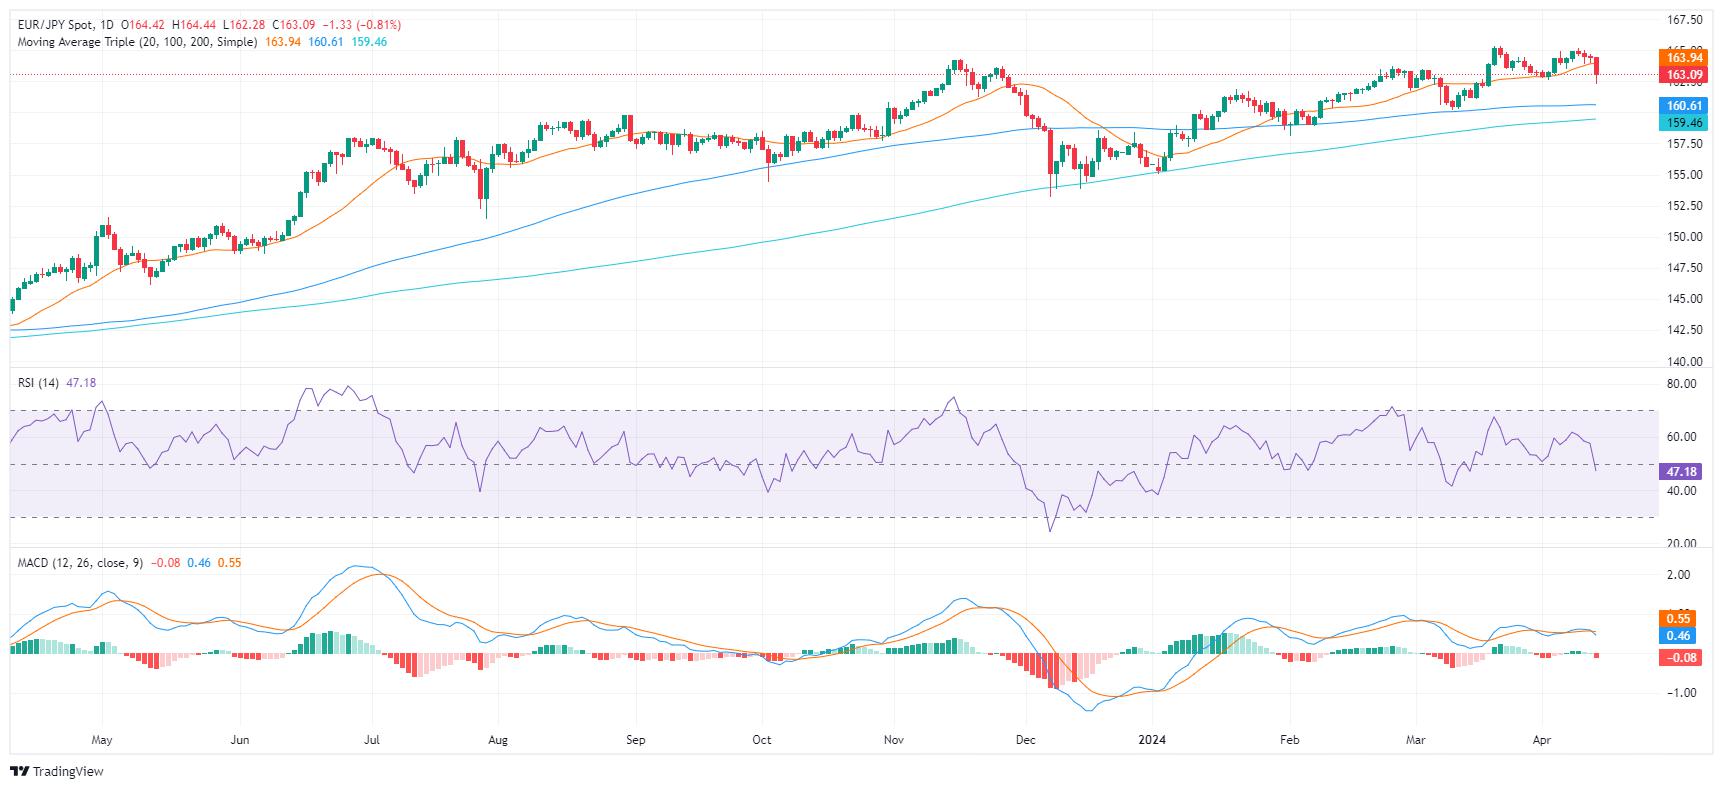 EUR/JPY Price Analysis: Bearish sentiment gains sway, 20-day SMA lost